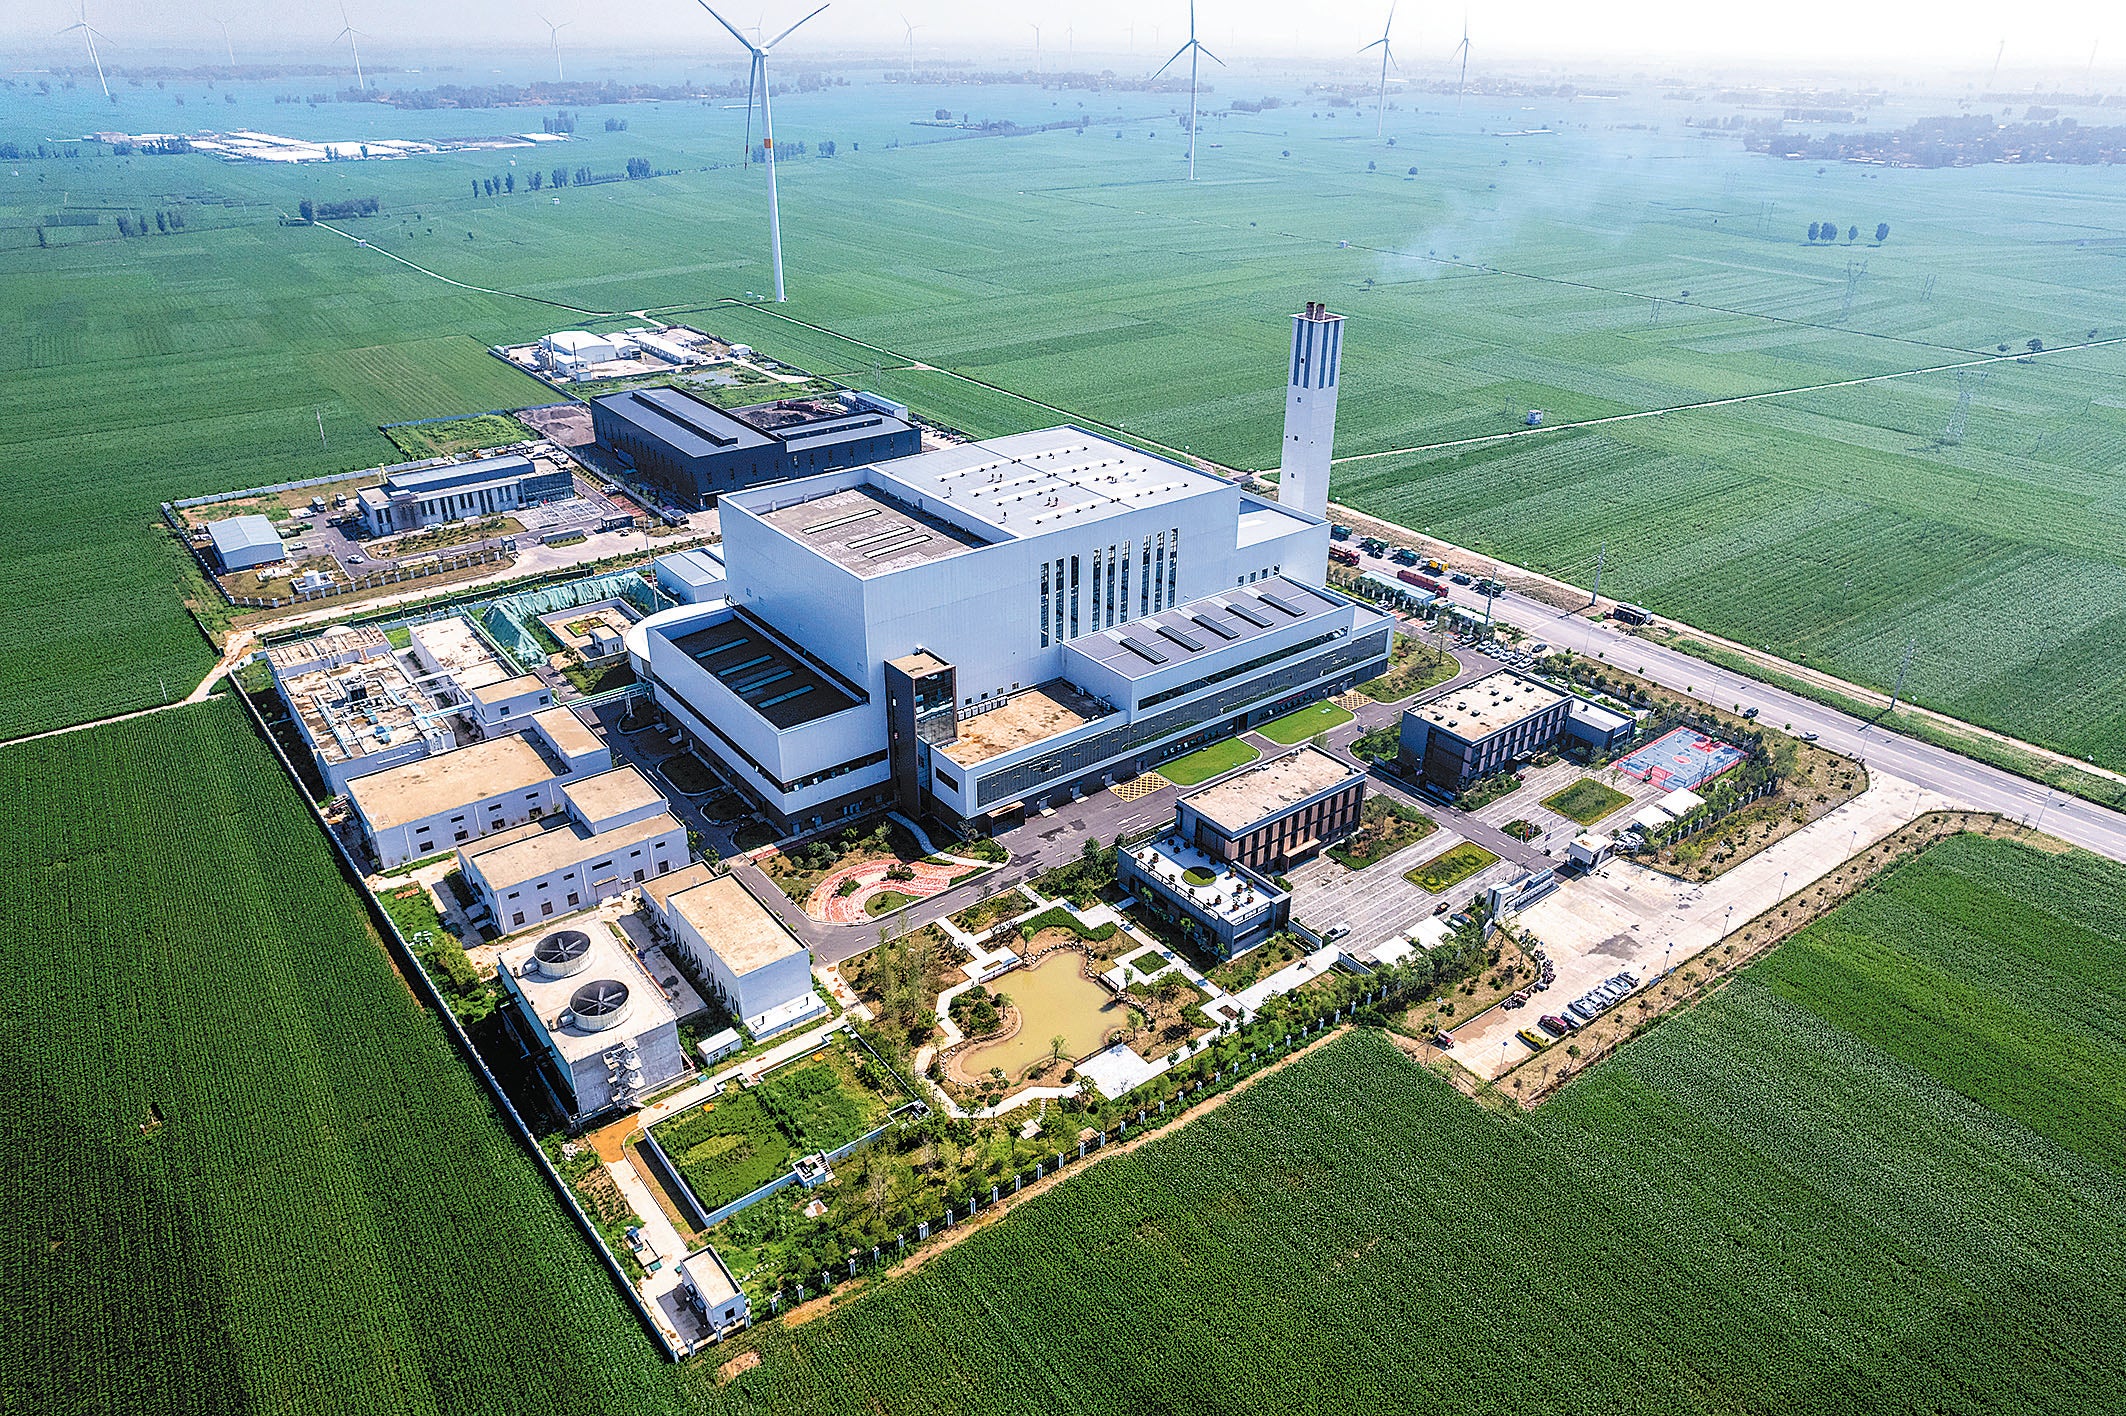 A waste-to-energy plant located in an industrial park in Huaxian county, Henan province